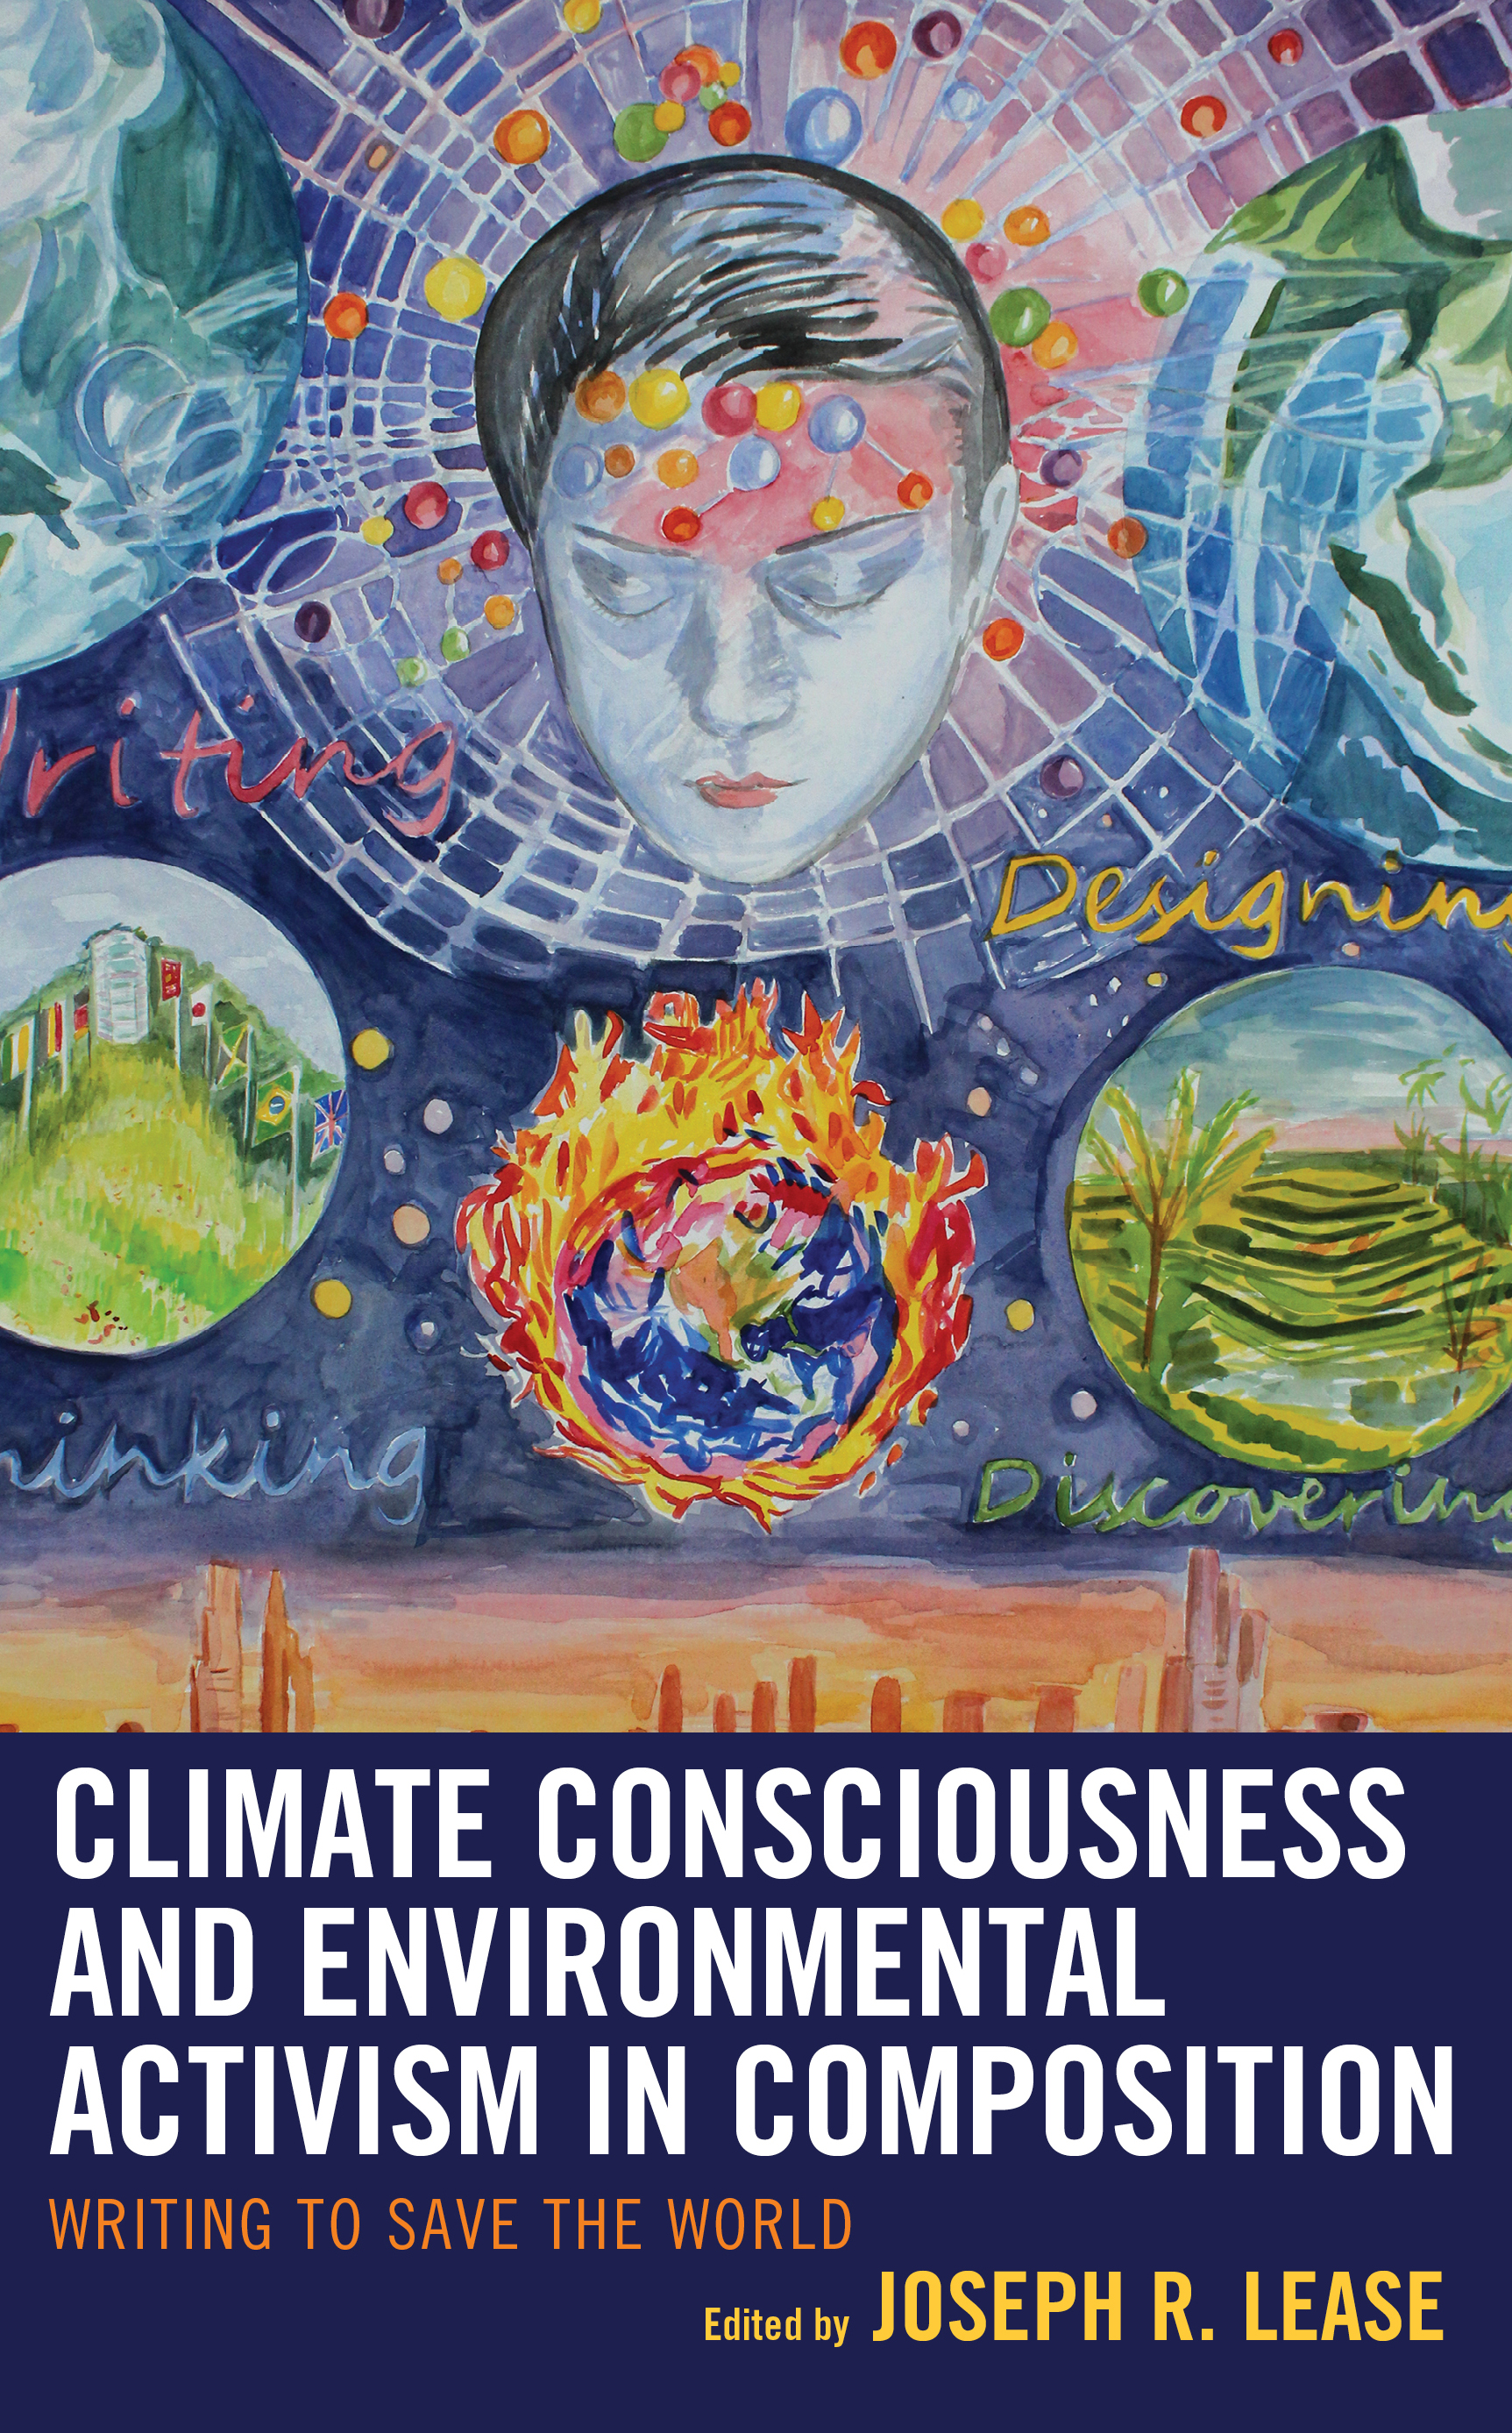 Climate Consciousness and Environmental Activism in Composition: Writing to Save the World